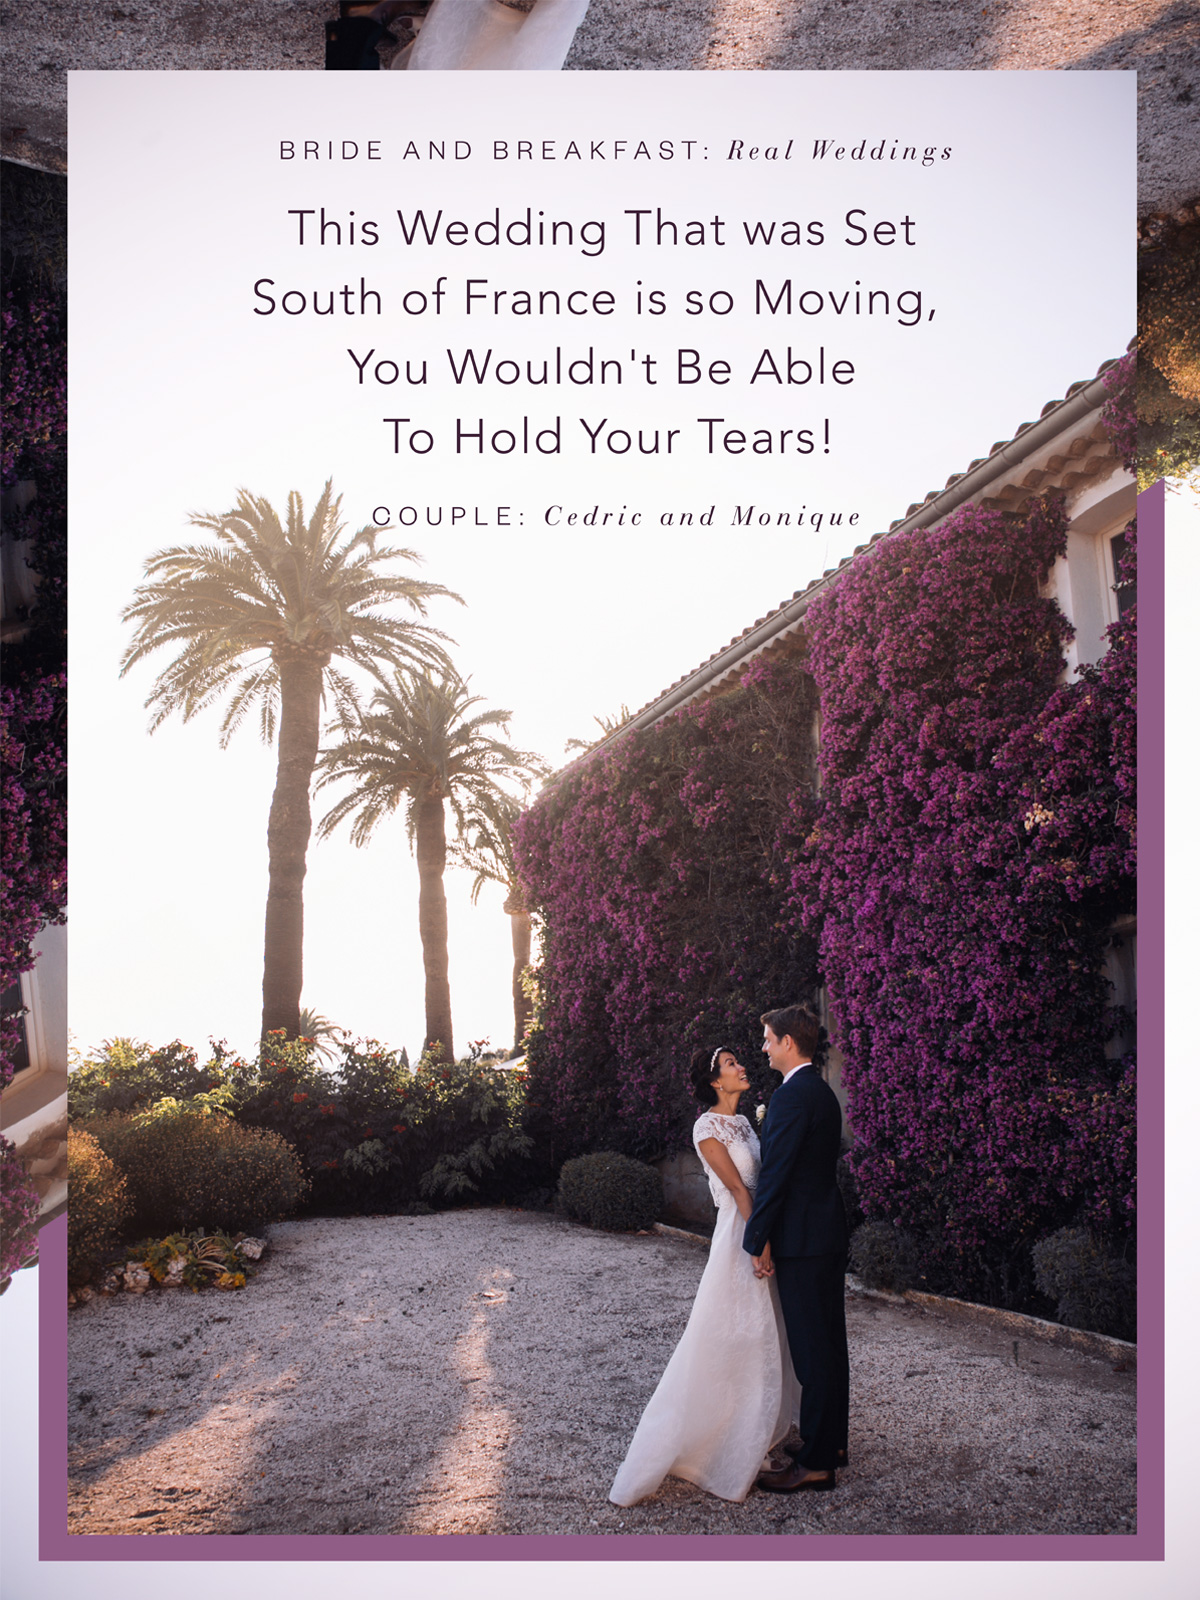 This Wedding That Was Set South of France is so Moving, You Wouldn't Be Able to Hold Your Tears!